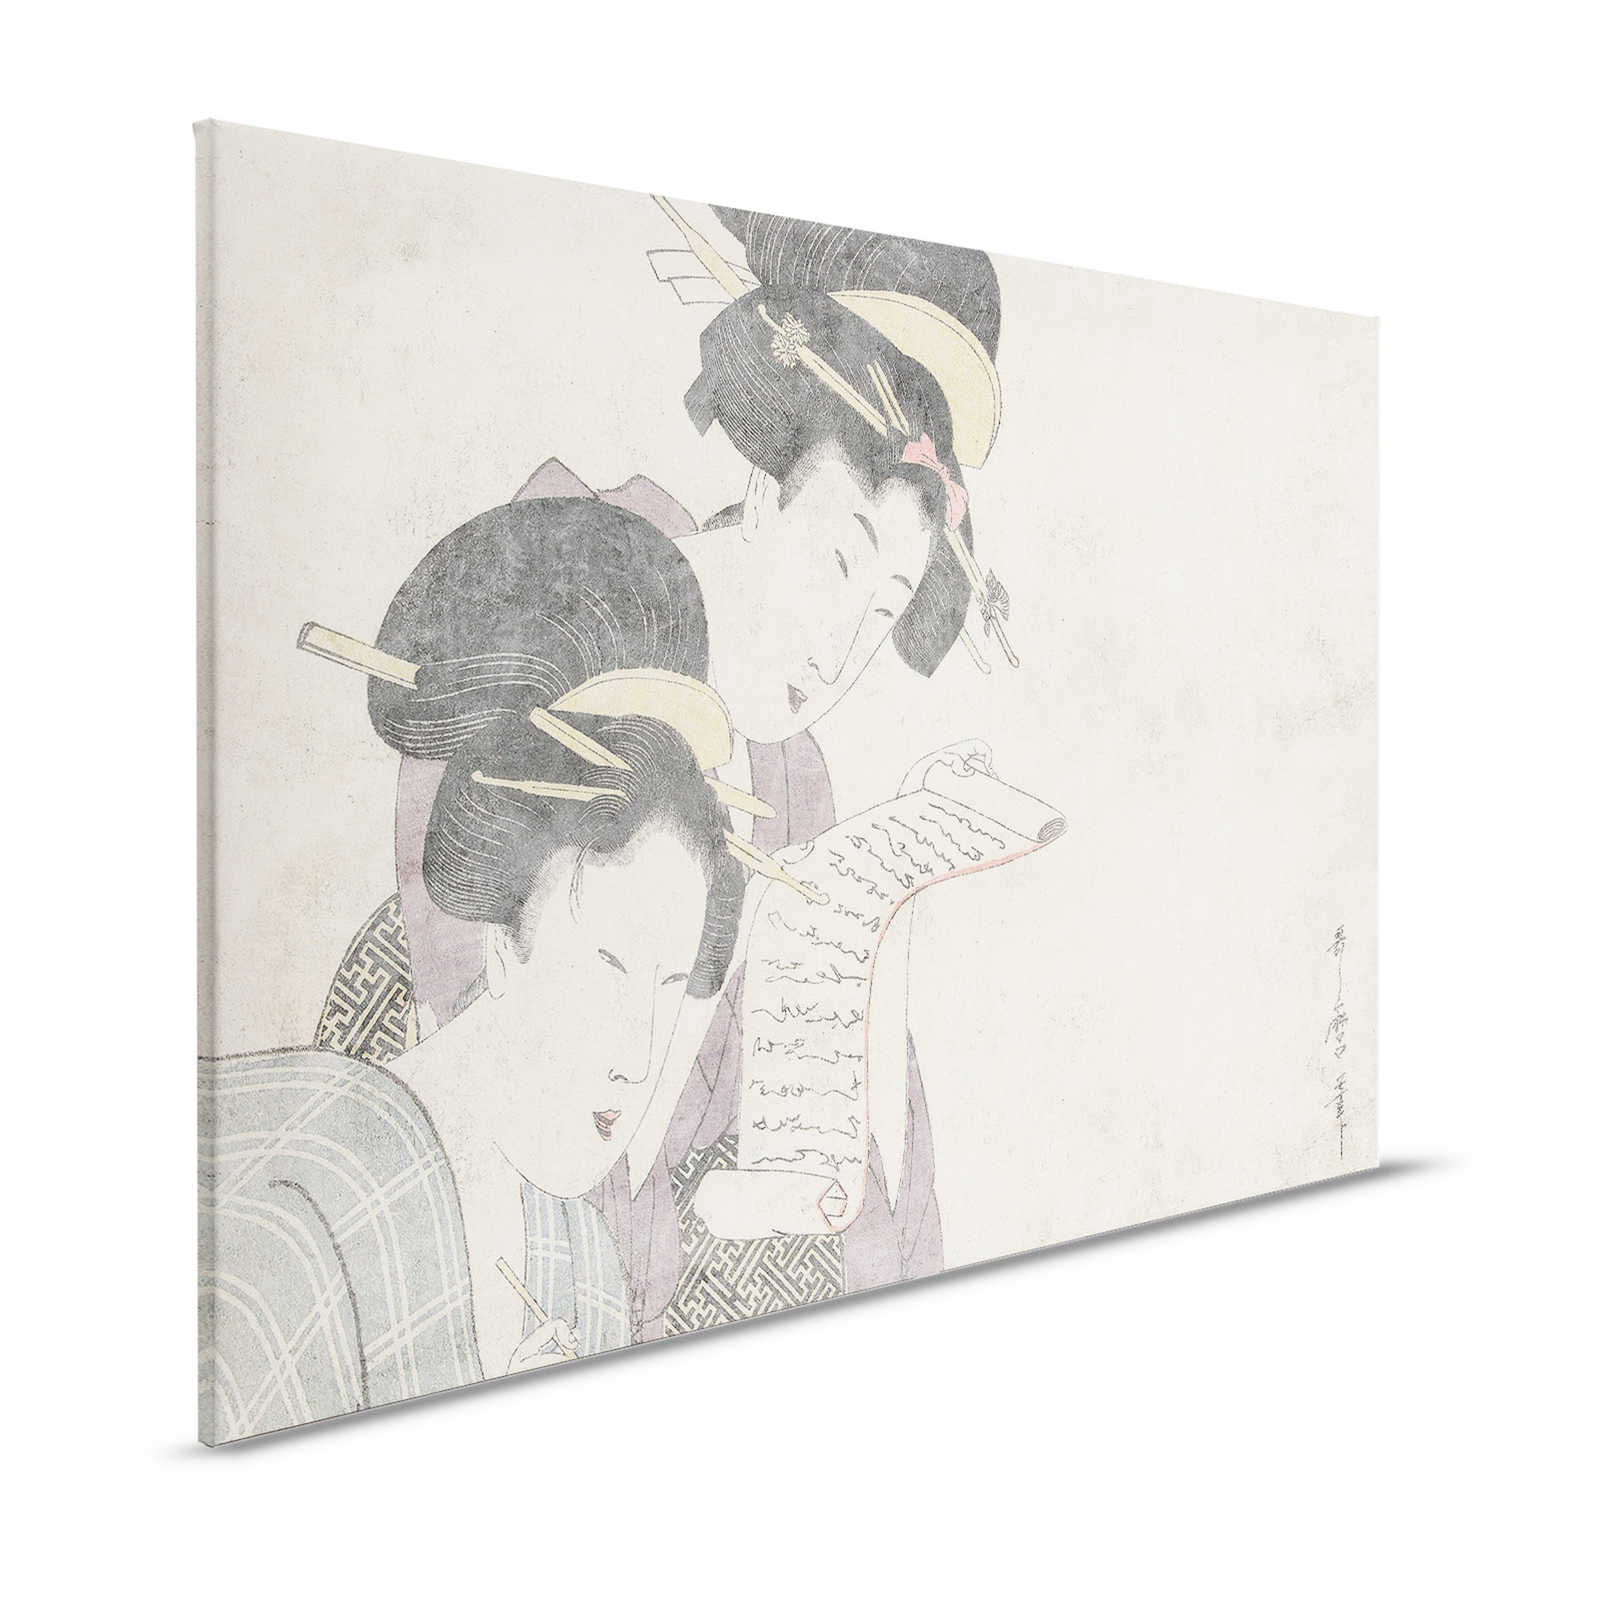 Osaka 3 - Asian Canvas Painting Vintage Drawing & Plaster Texture - 1.20 m x 0.80 m
